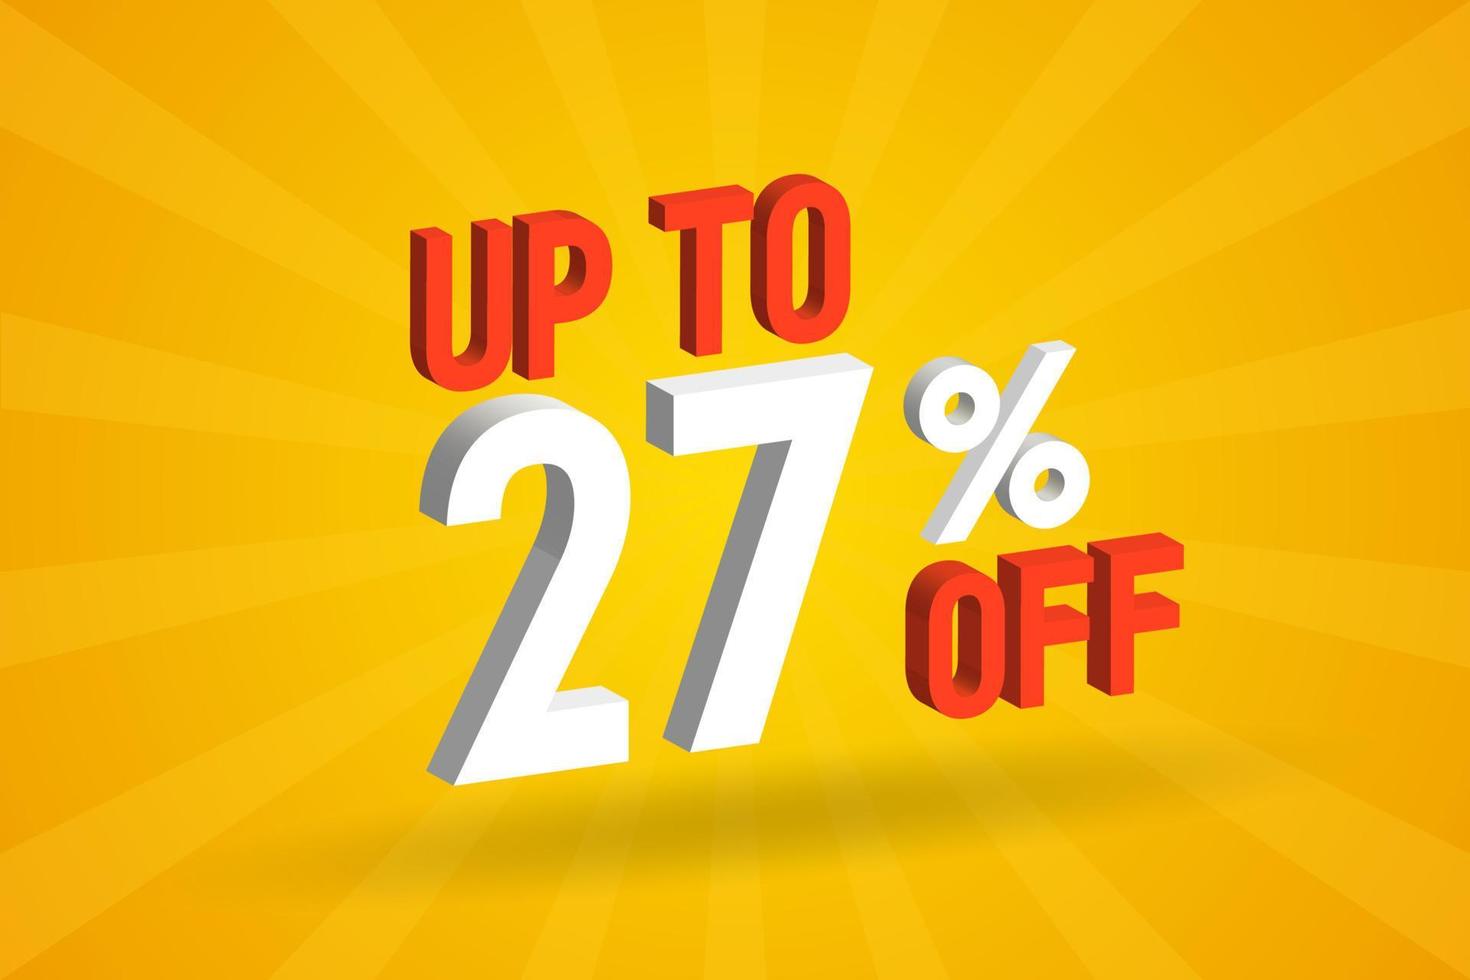 Up To 27 Percent off 3D Special promotional campaign design. Upto 27 of 3D Discount Offer for Sale and marketing. vector